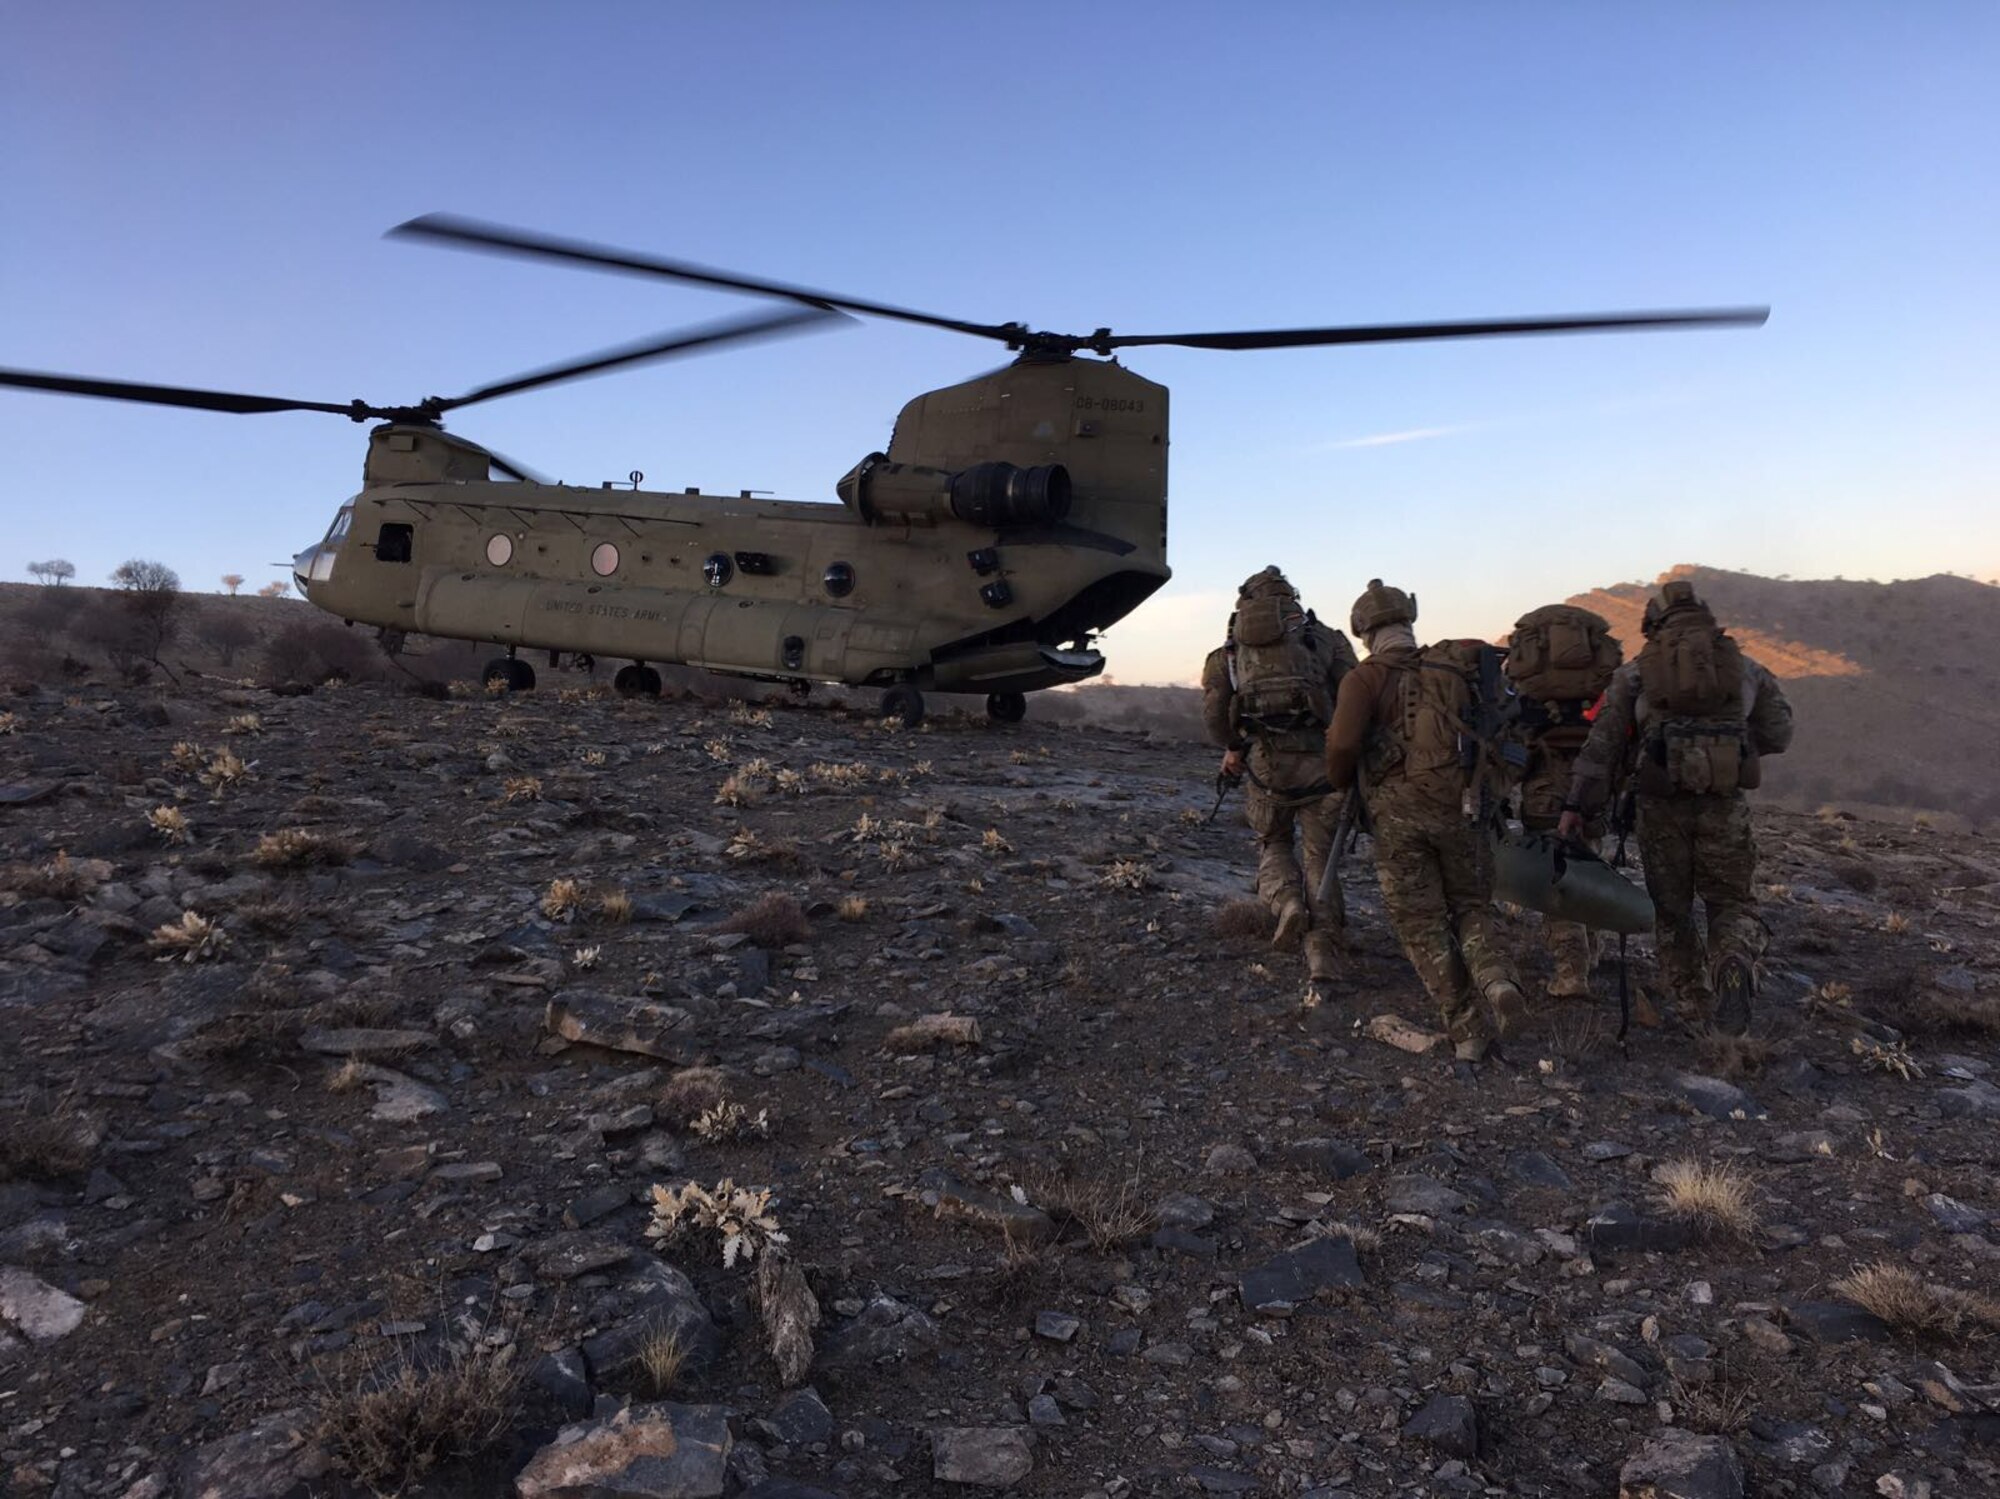 Members of the 83rd Expeditionary Rescue Squadron prepare to board a U.S. Army CH-47 Chinook at an undisclosed location in Afghanistan The 83rd ERQS, made up of Army Chinook crews and Air Force Guardian Angel teams, provide Air Force Central Command with a combat search and rescue capability. (Courtesy photo)